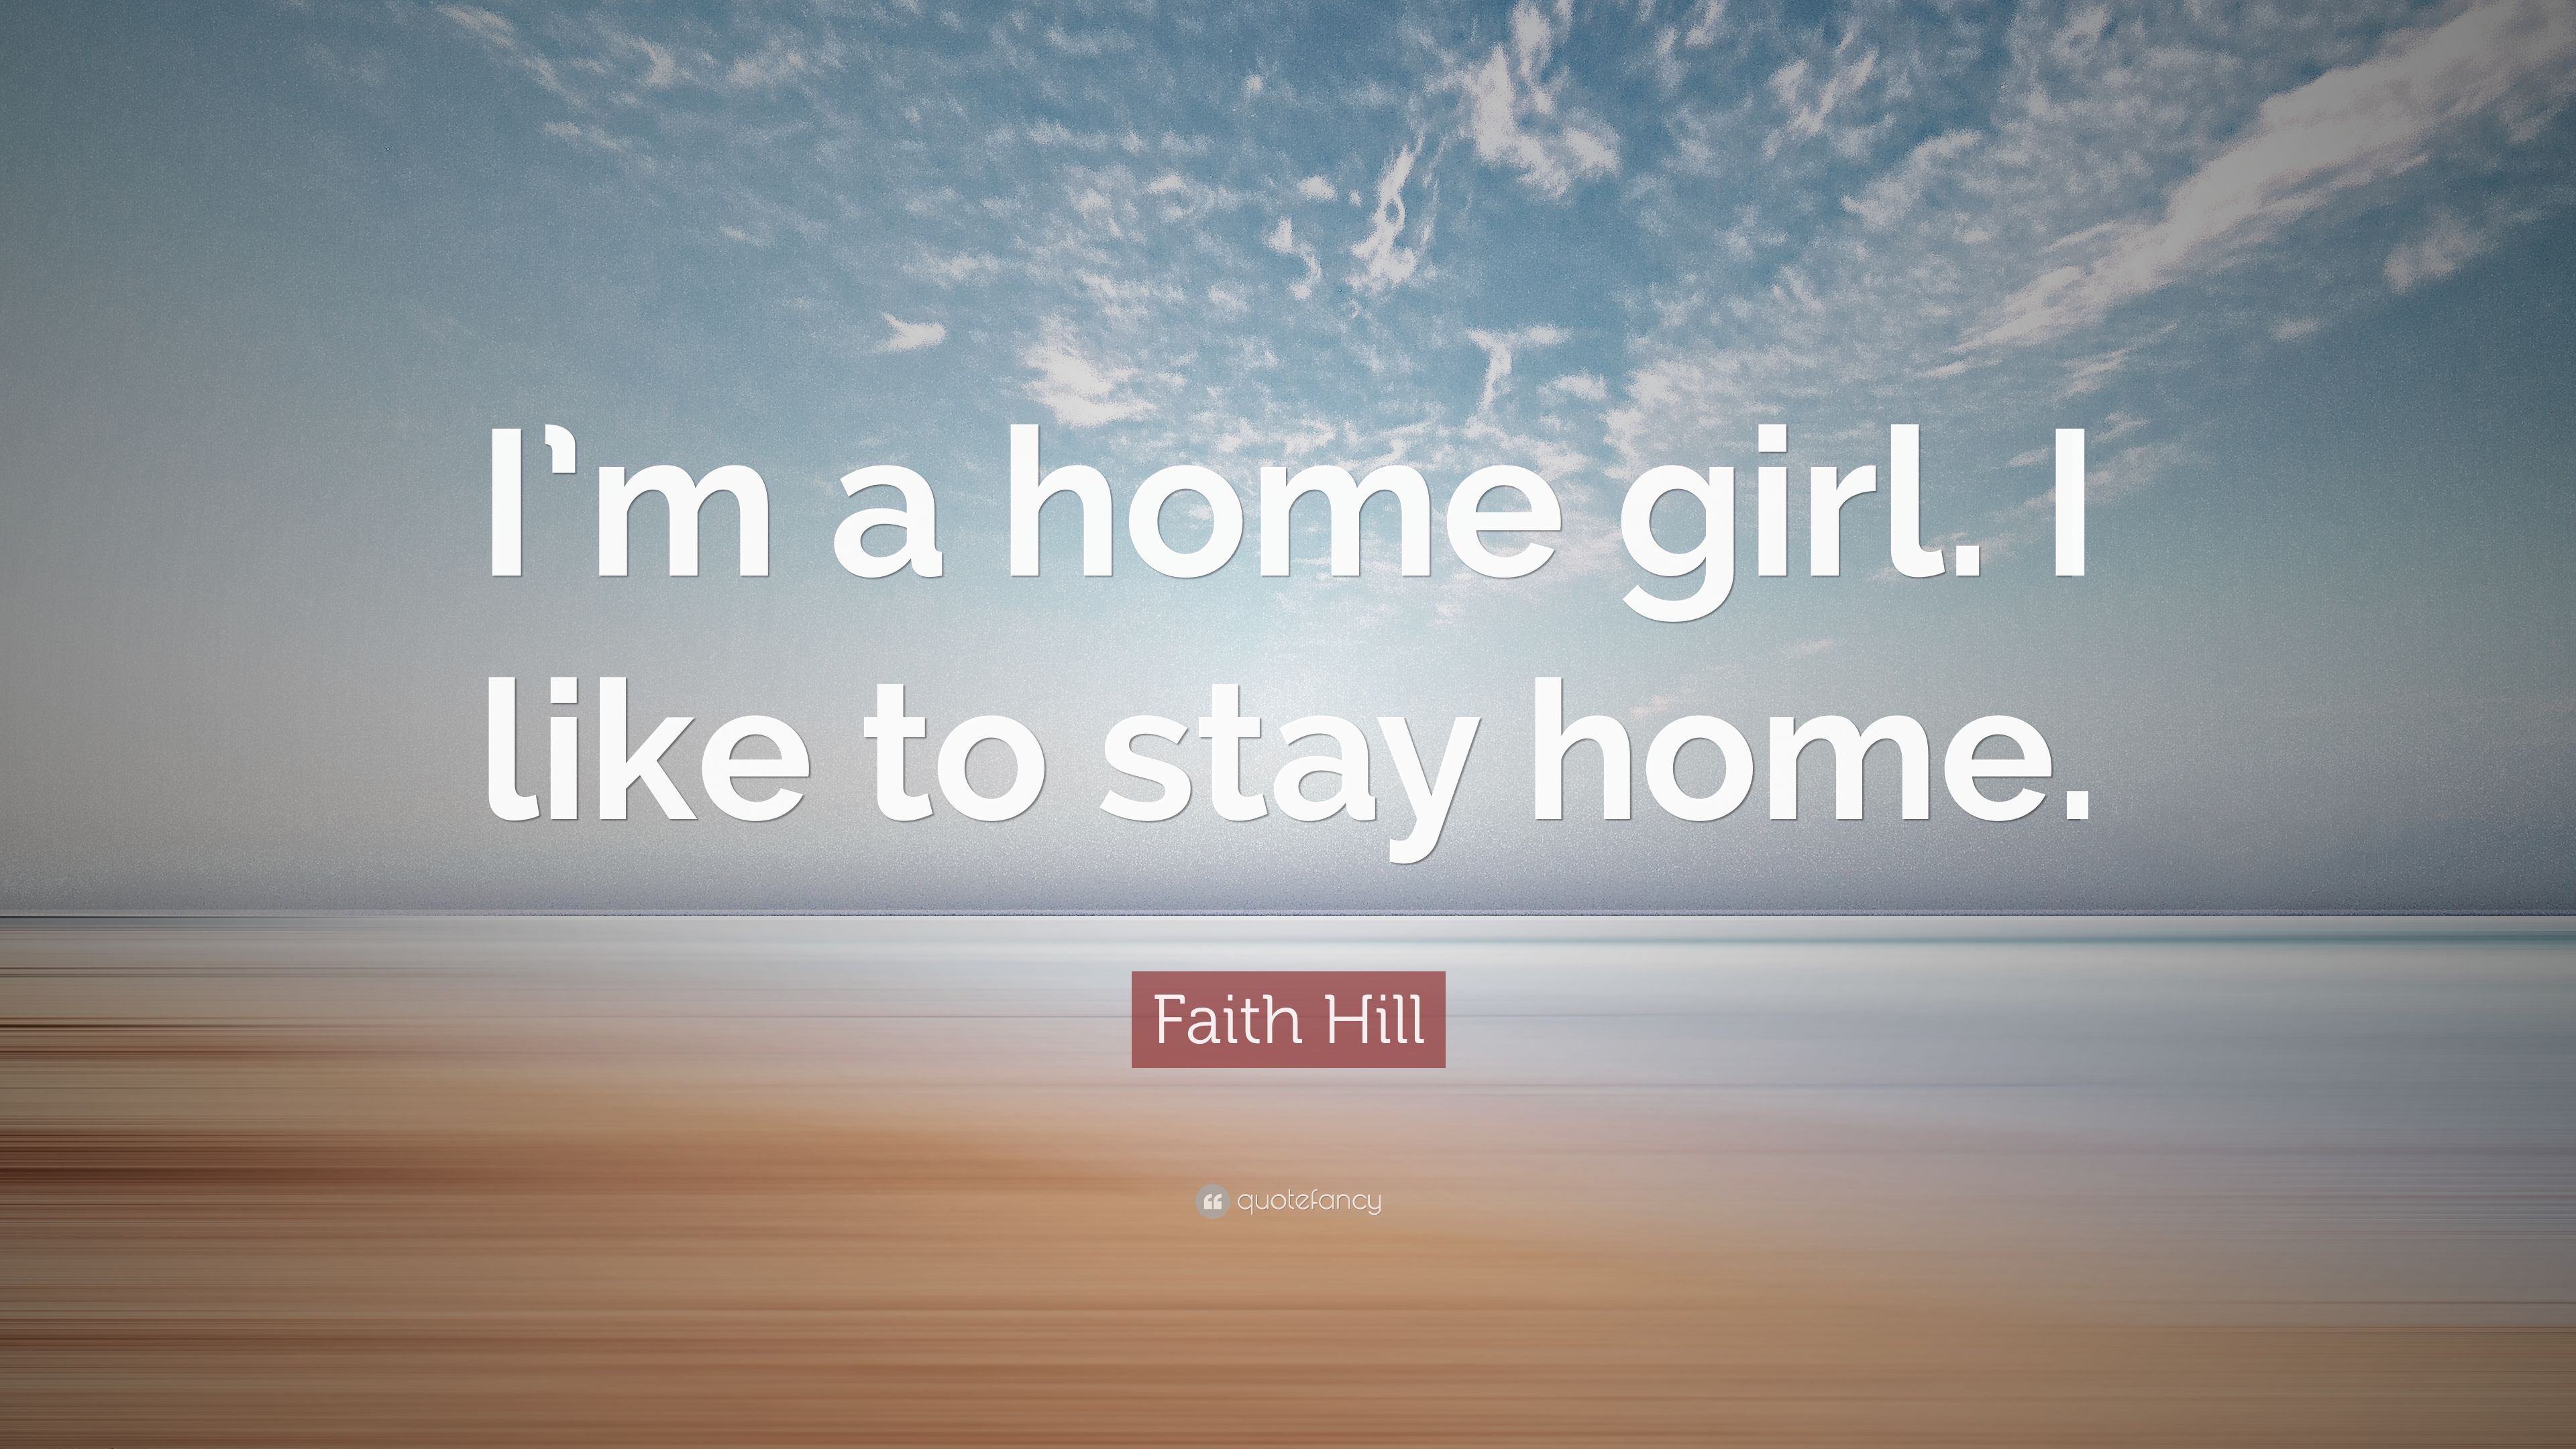 Faith Hill Quote: “I'm a home girl. I like to stay home.” 7